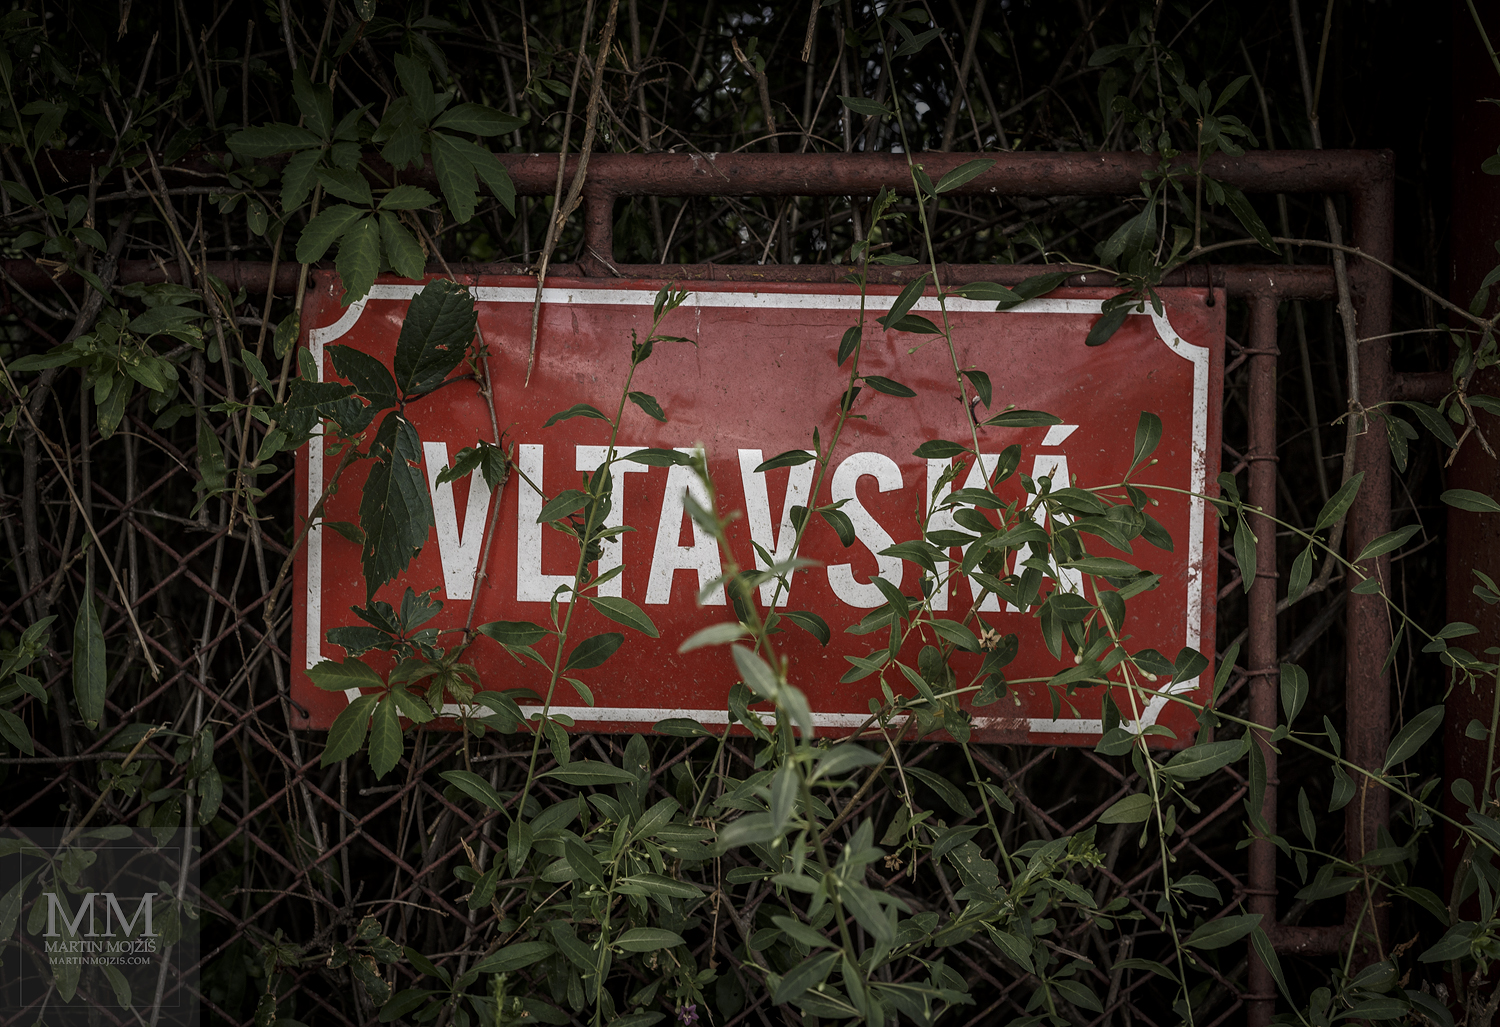 Photograph of the Vltavská street name, partly hidden behind the branches of the bushes. Large format fine art photograph. Martin Mojzis.